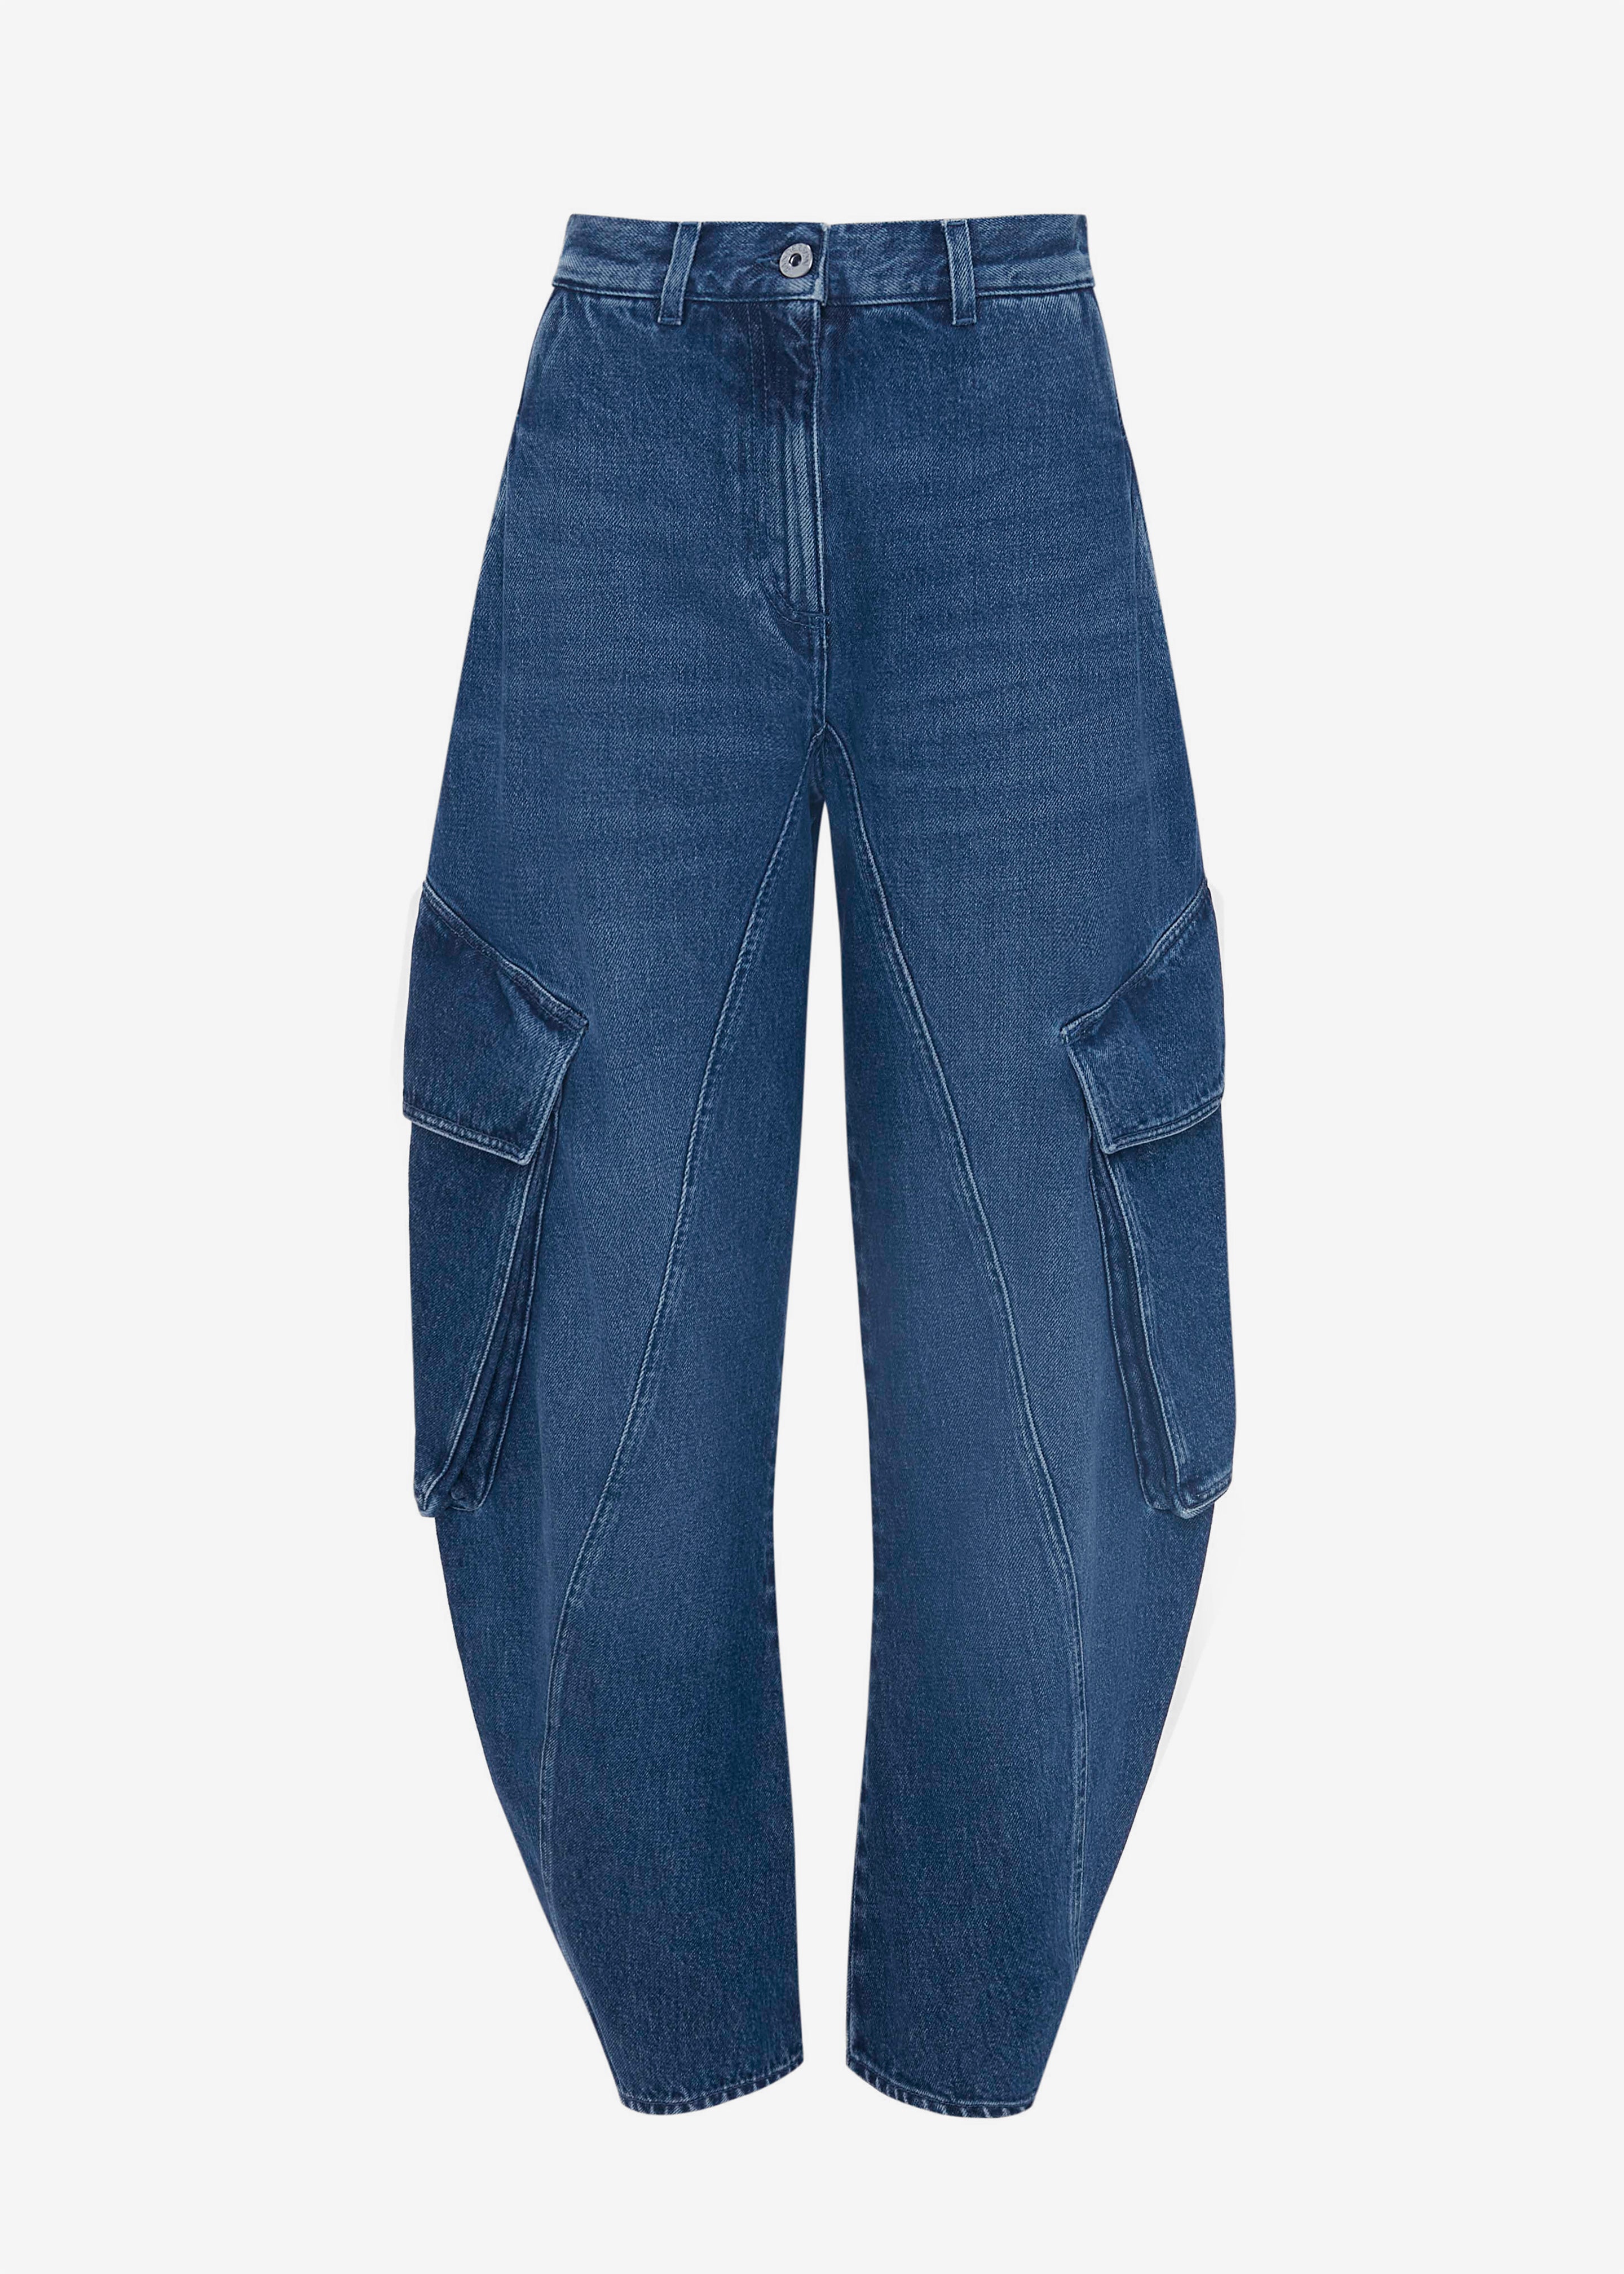 JW Anderson Twisted Cargo Jeans - Blue - 7